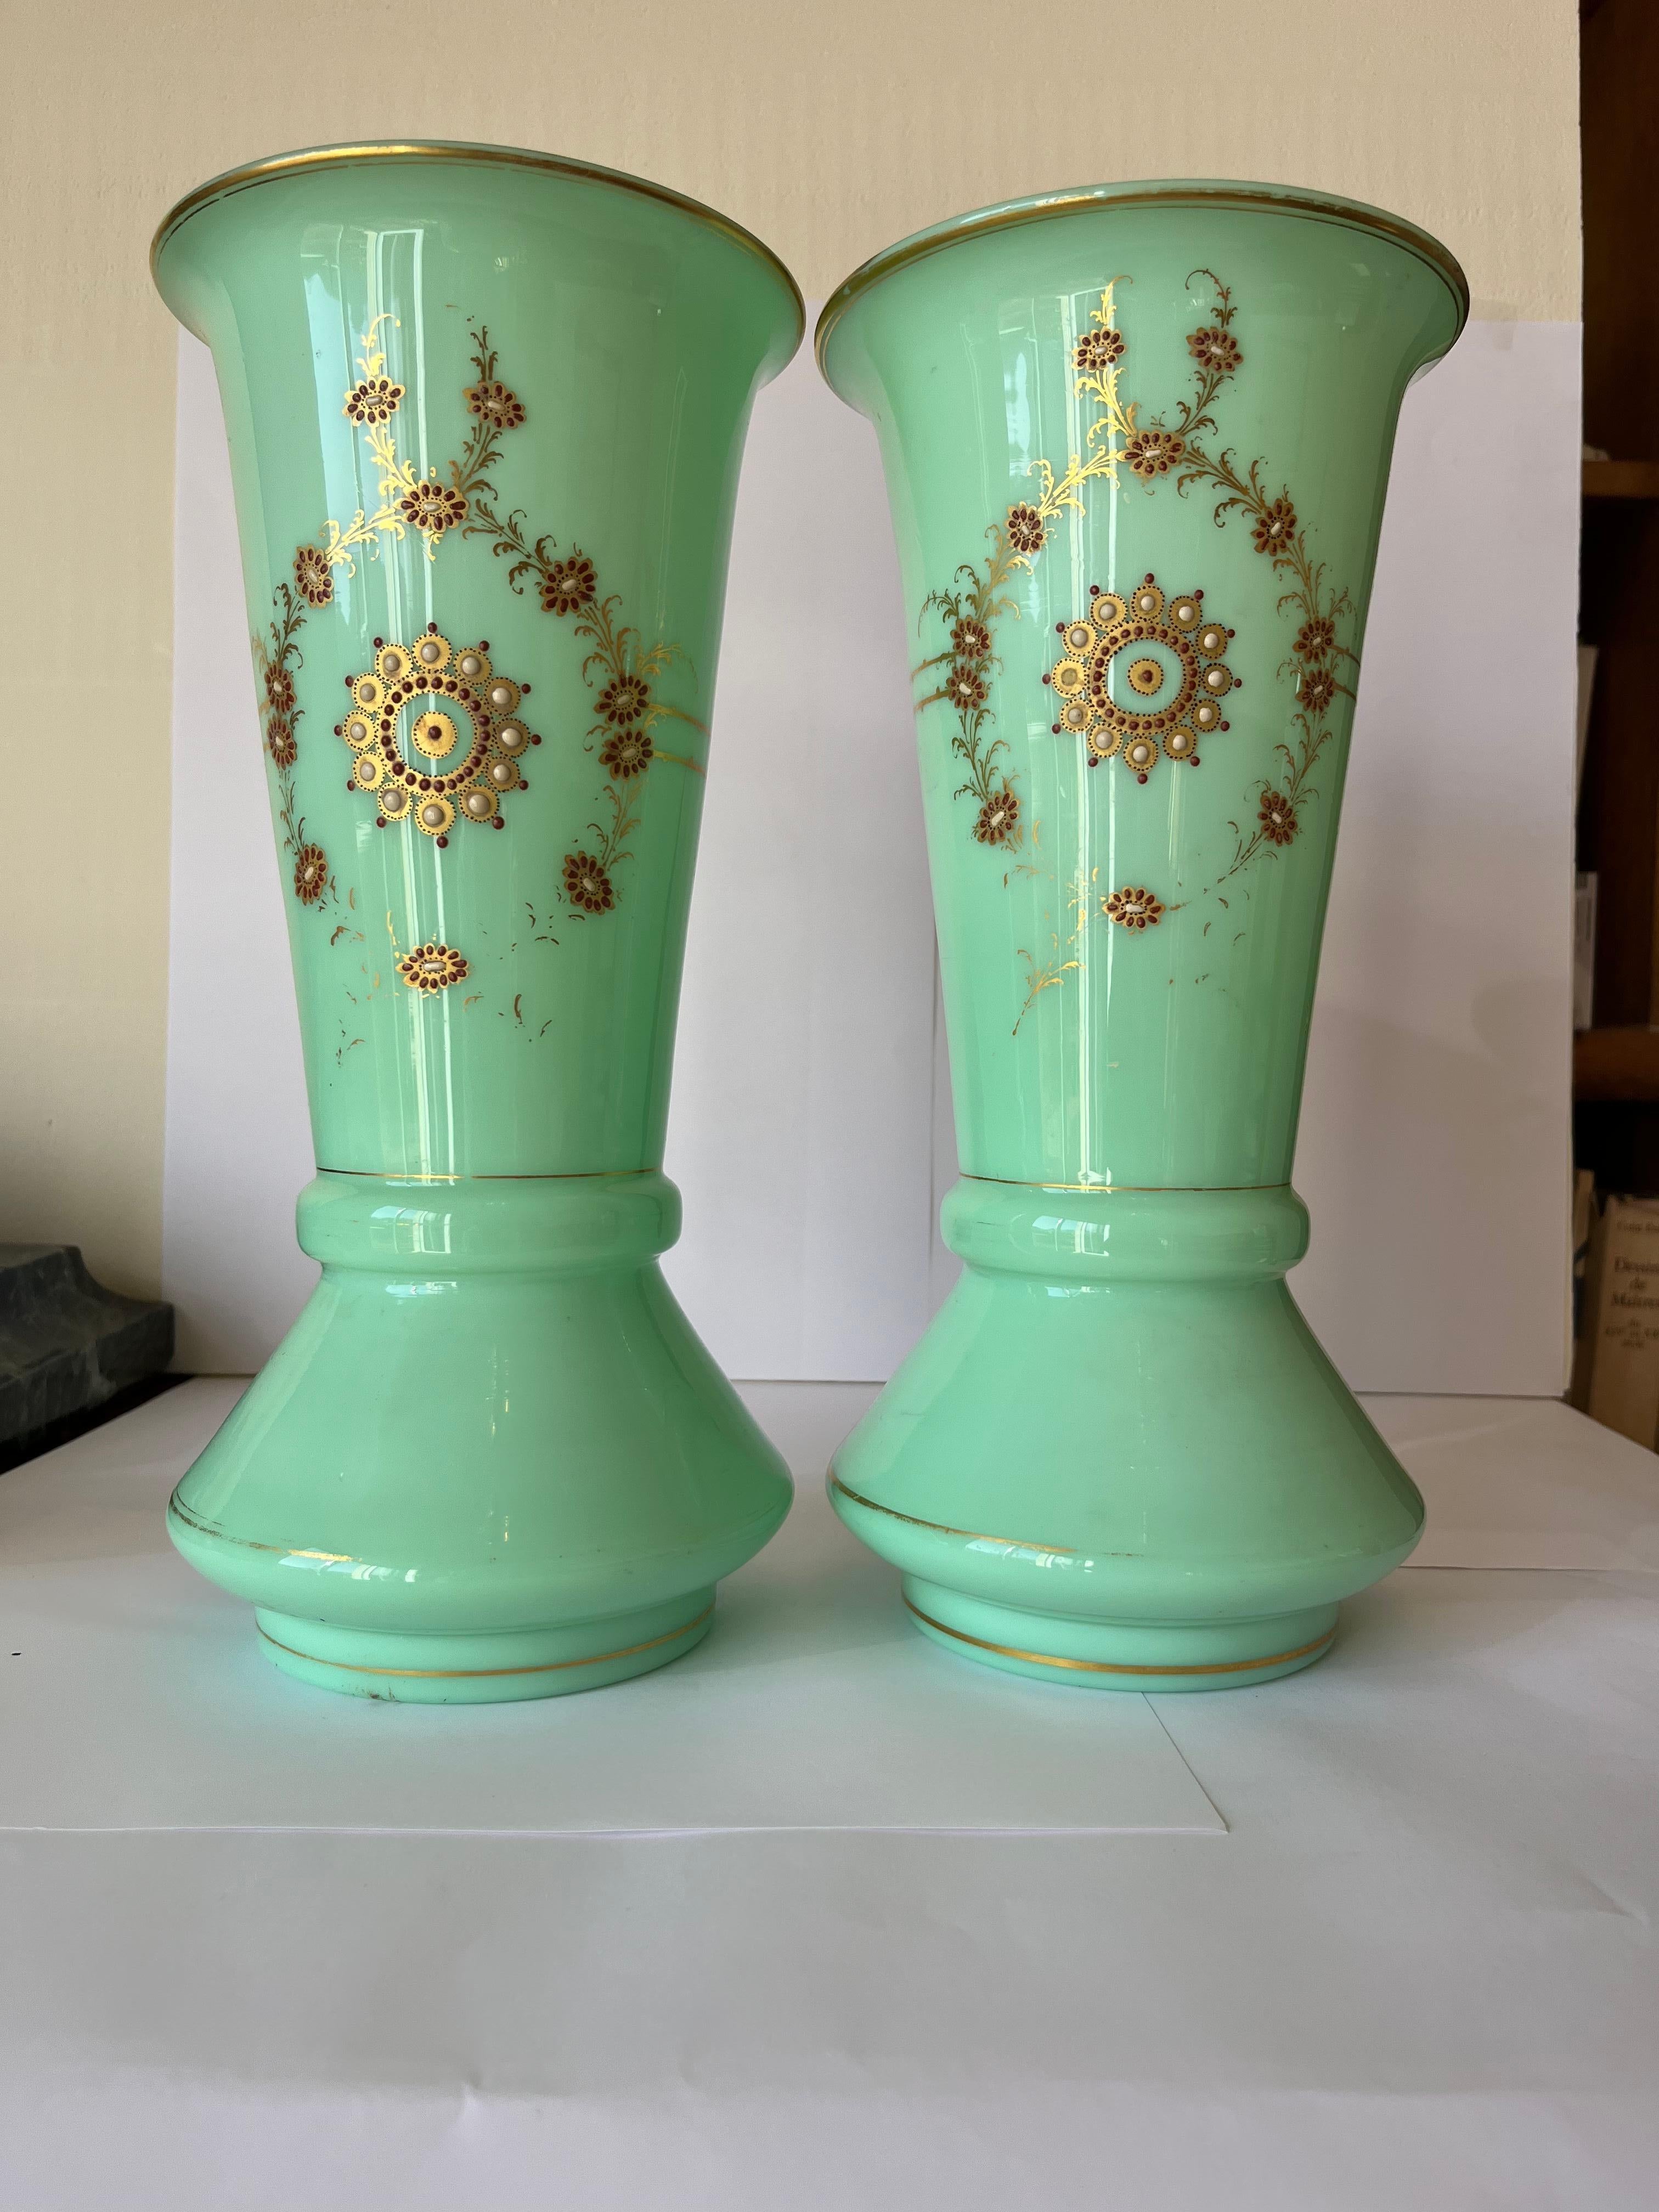 Water green pair of opaline Louis Phillipe vases.
The color is so interesting and the size as well, elegant shape and refined decorative objects.
Could be adjusted and matching the color of the curtains or of the seats ina living room.